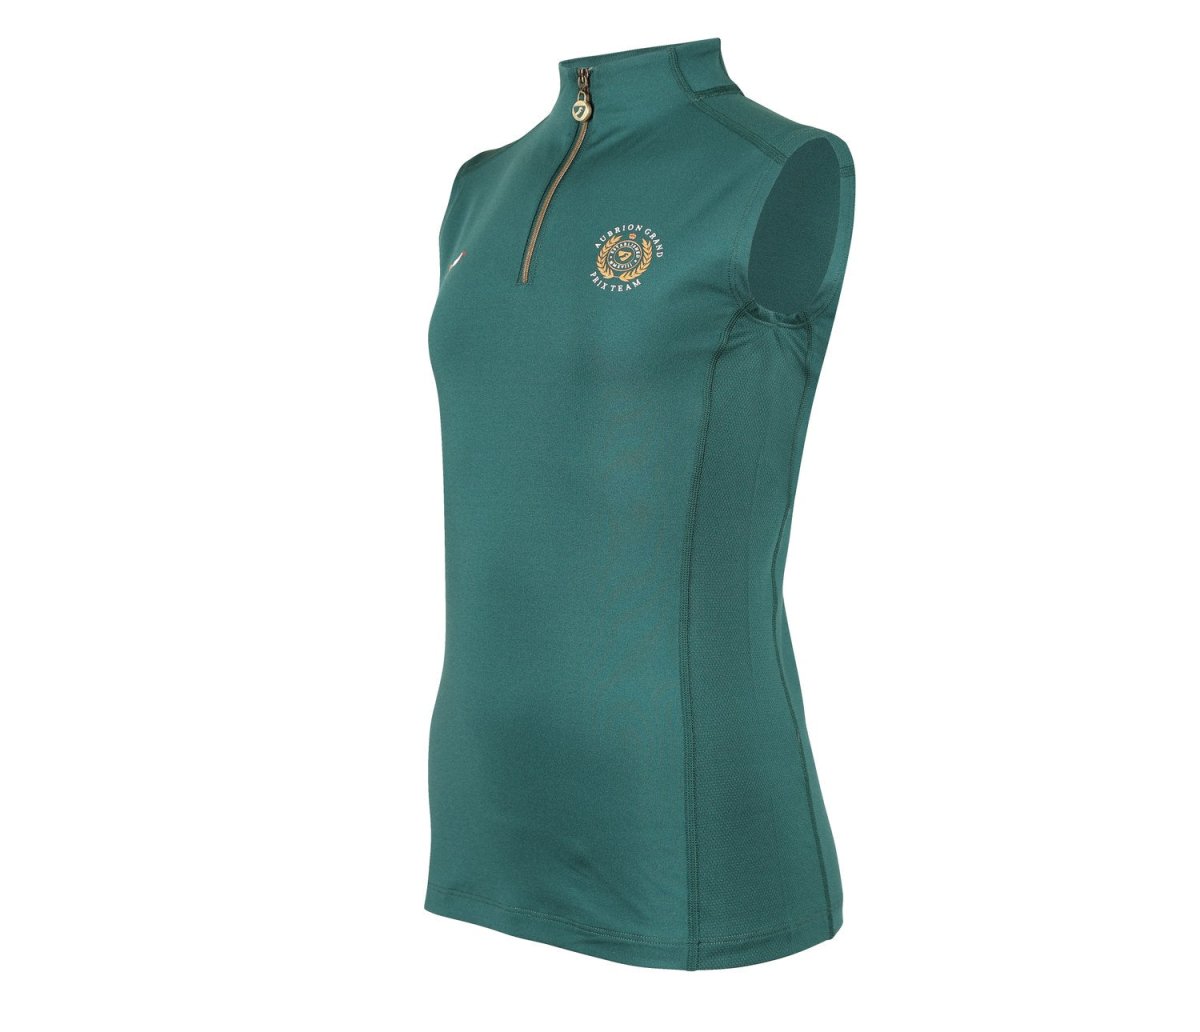 Aubrion SS24 Team Sleeveless Base Layer - Young Rider - Green - 11/12 Years